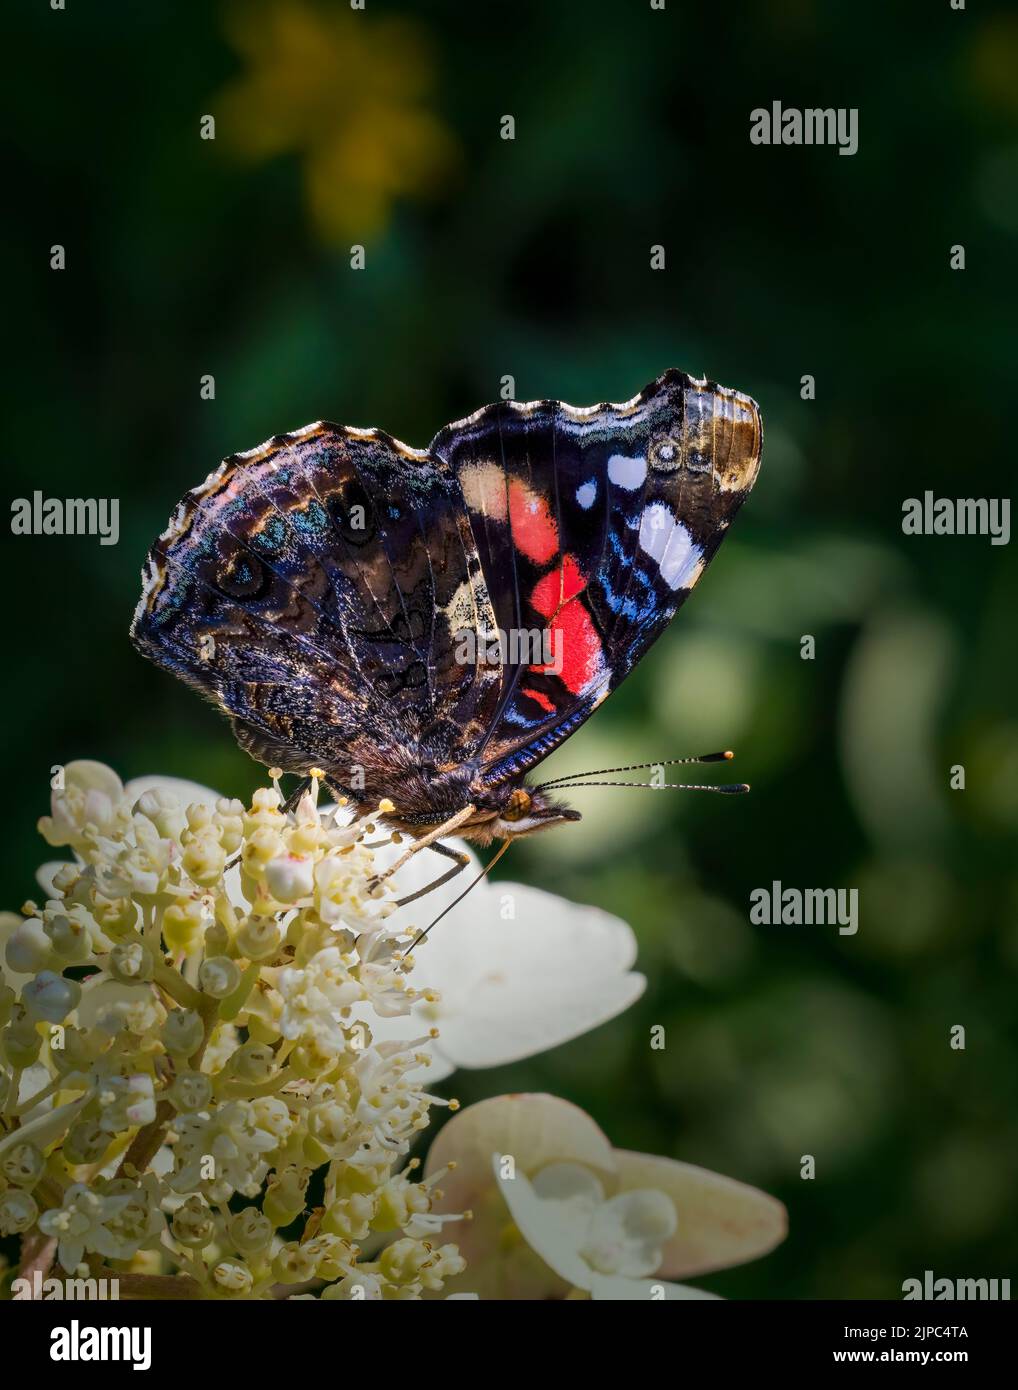 The beautiful underside of a Red Admiral butterfly (Vanessa atalanta), as it feeds from a white Hydrangea flower Stock Photo